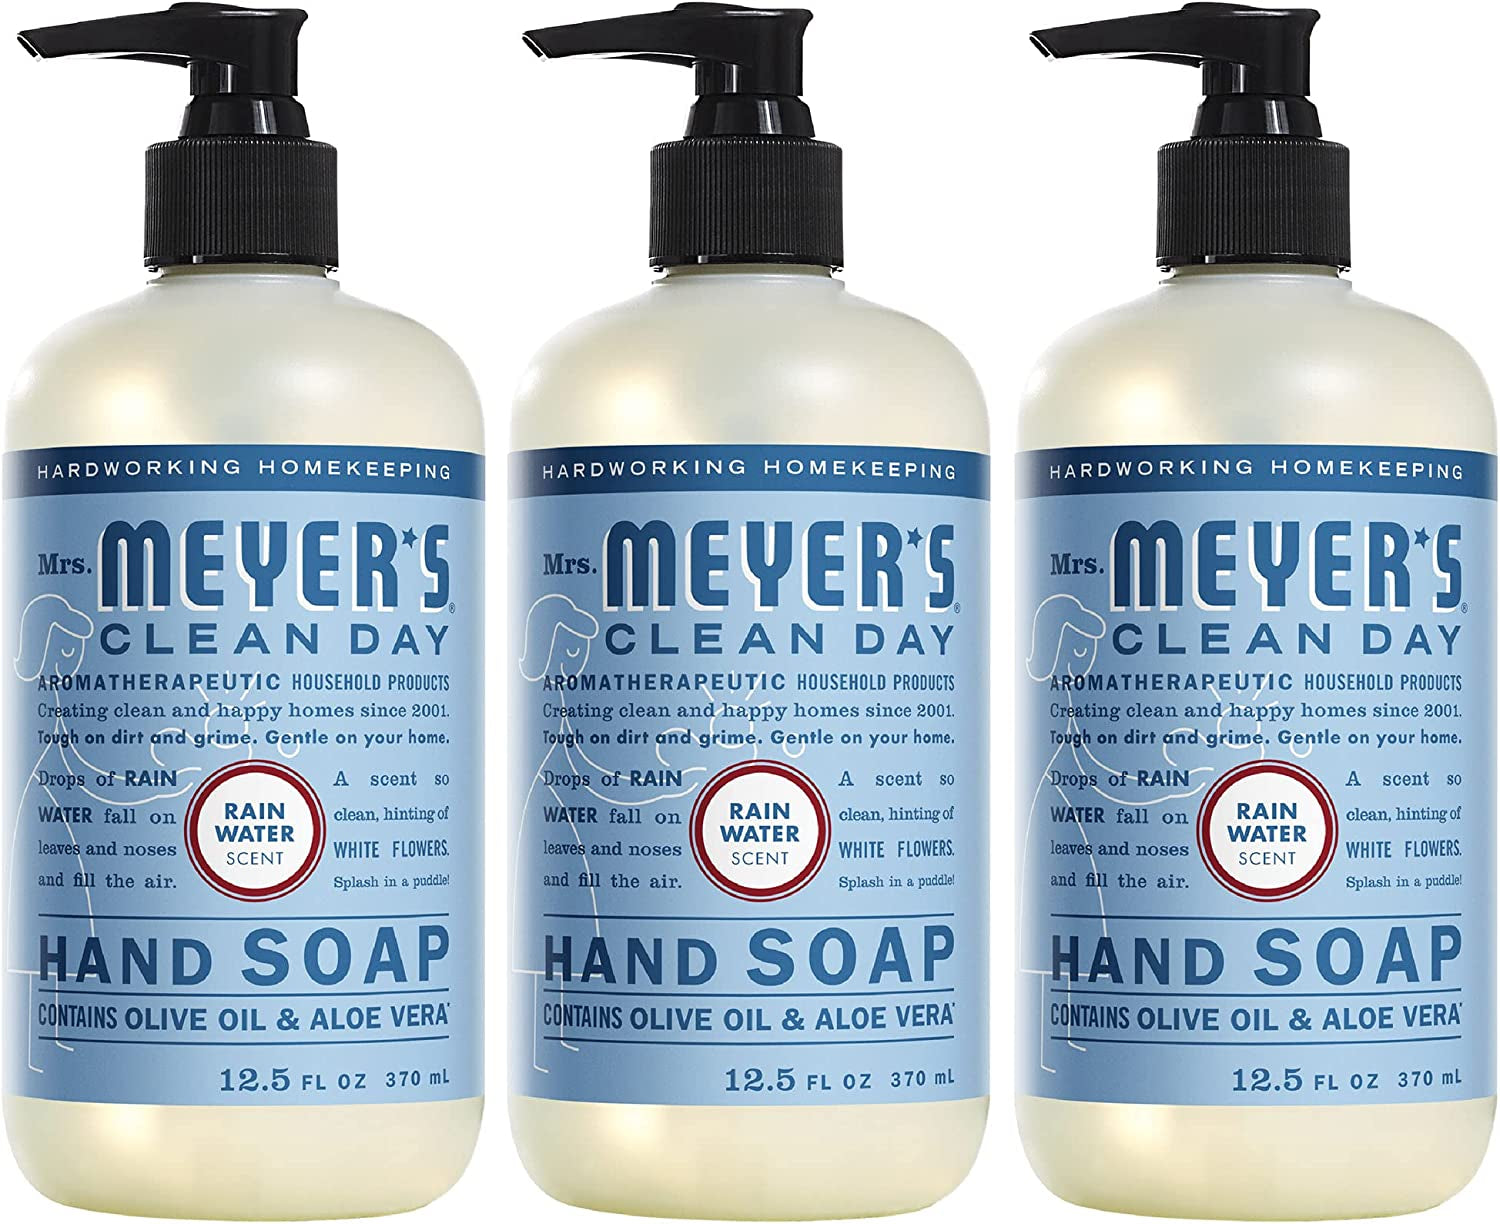 Mrs. Meyer'S Hand Soap, Made with Essential Oils, Biodegradable Formula, Rain Water, 12.5 Fl. Oz - Pack of 3